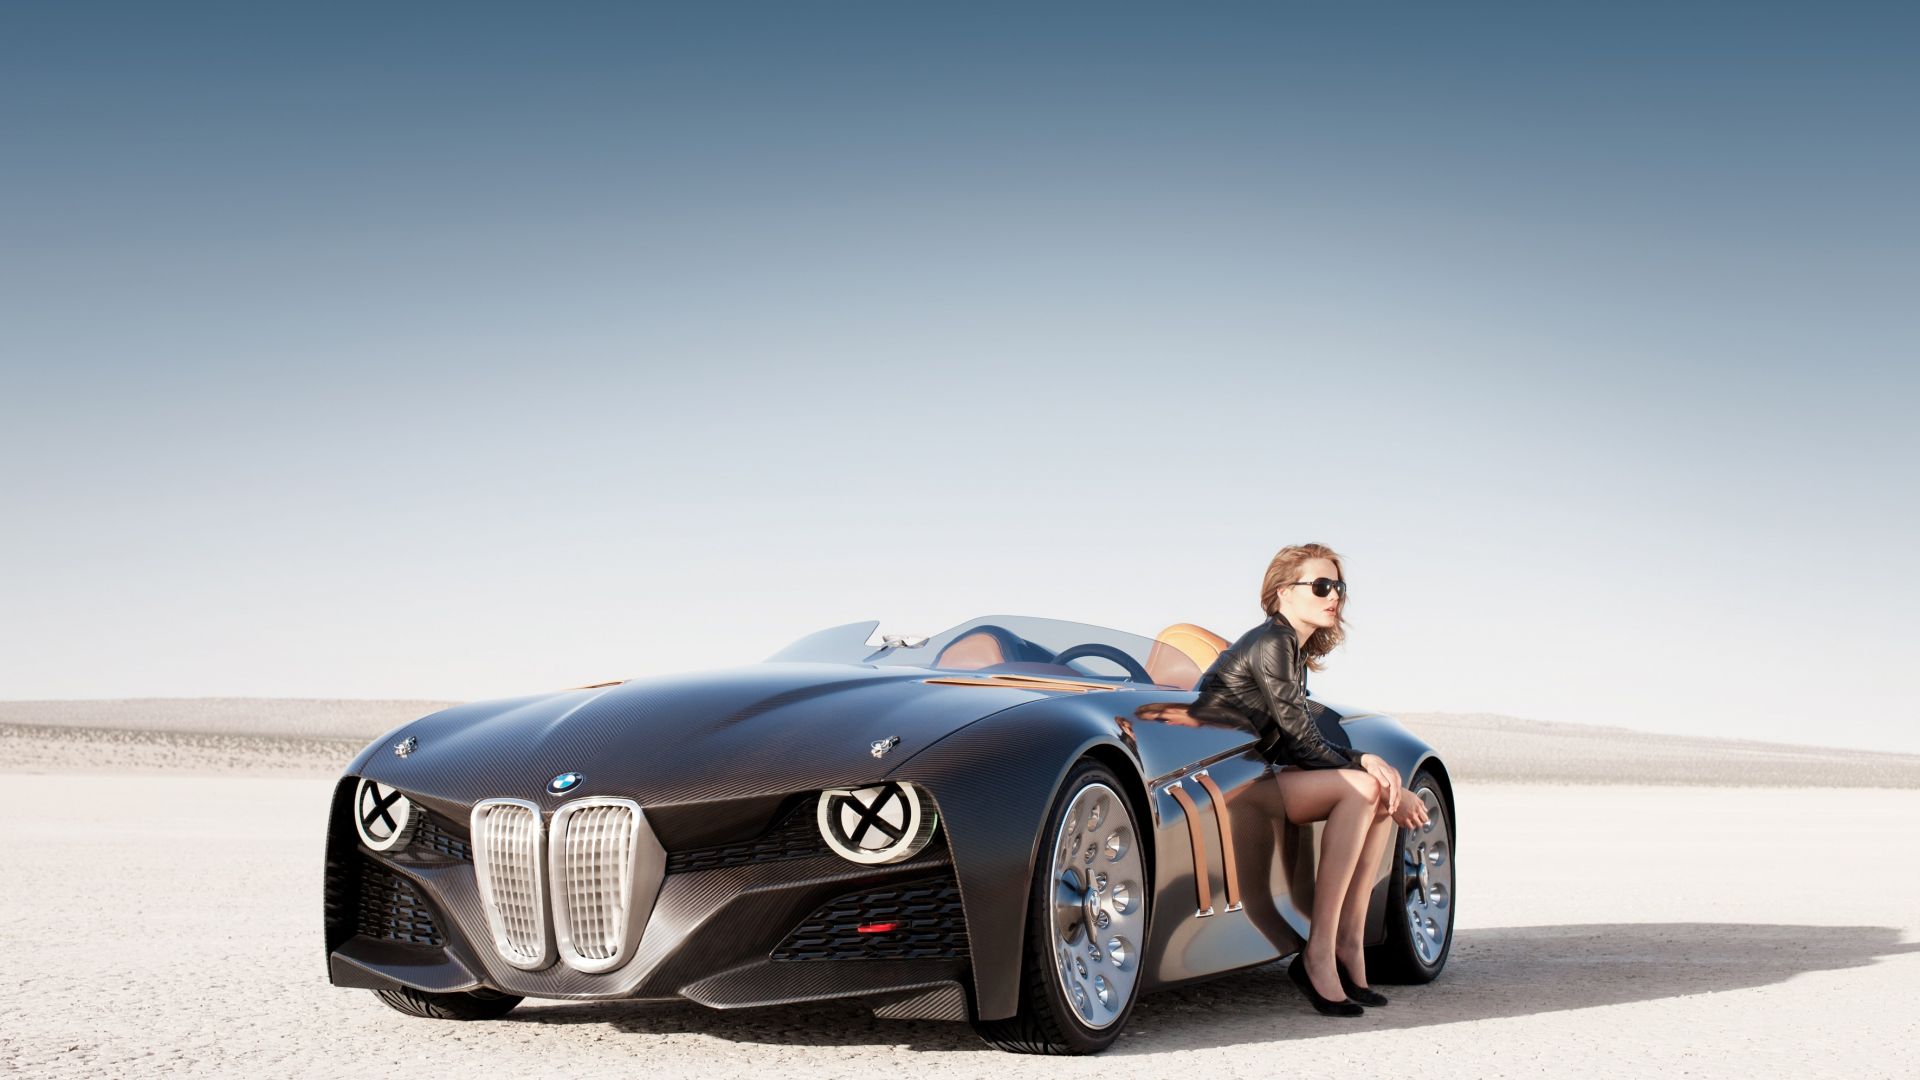 Wallpaper The BMW 328 Homage cars, luxury cars, sports car